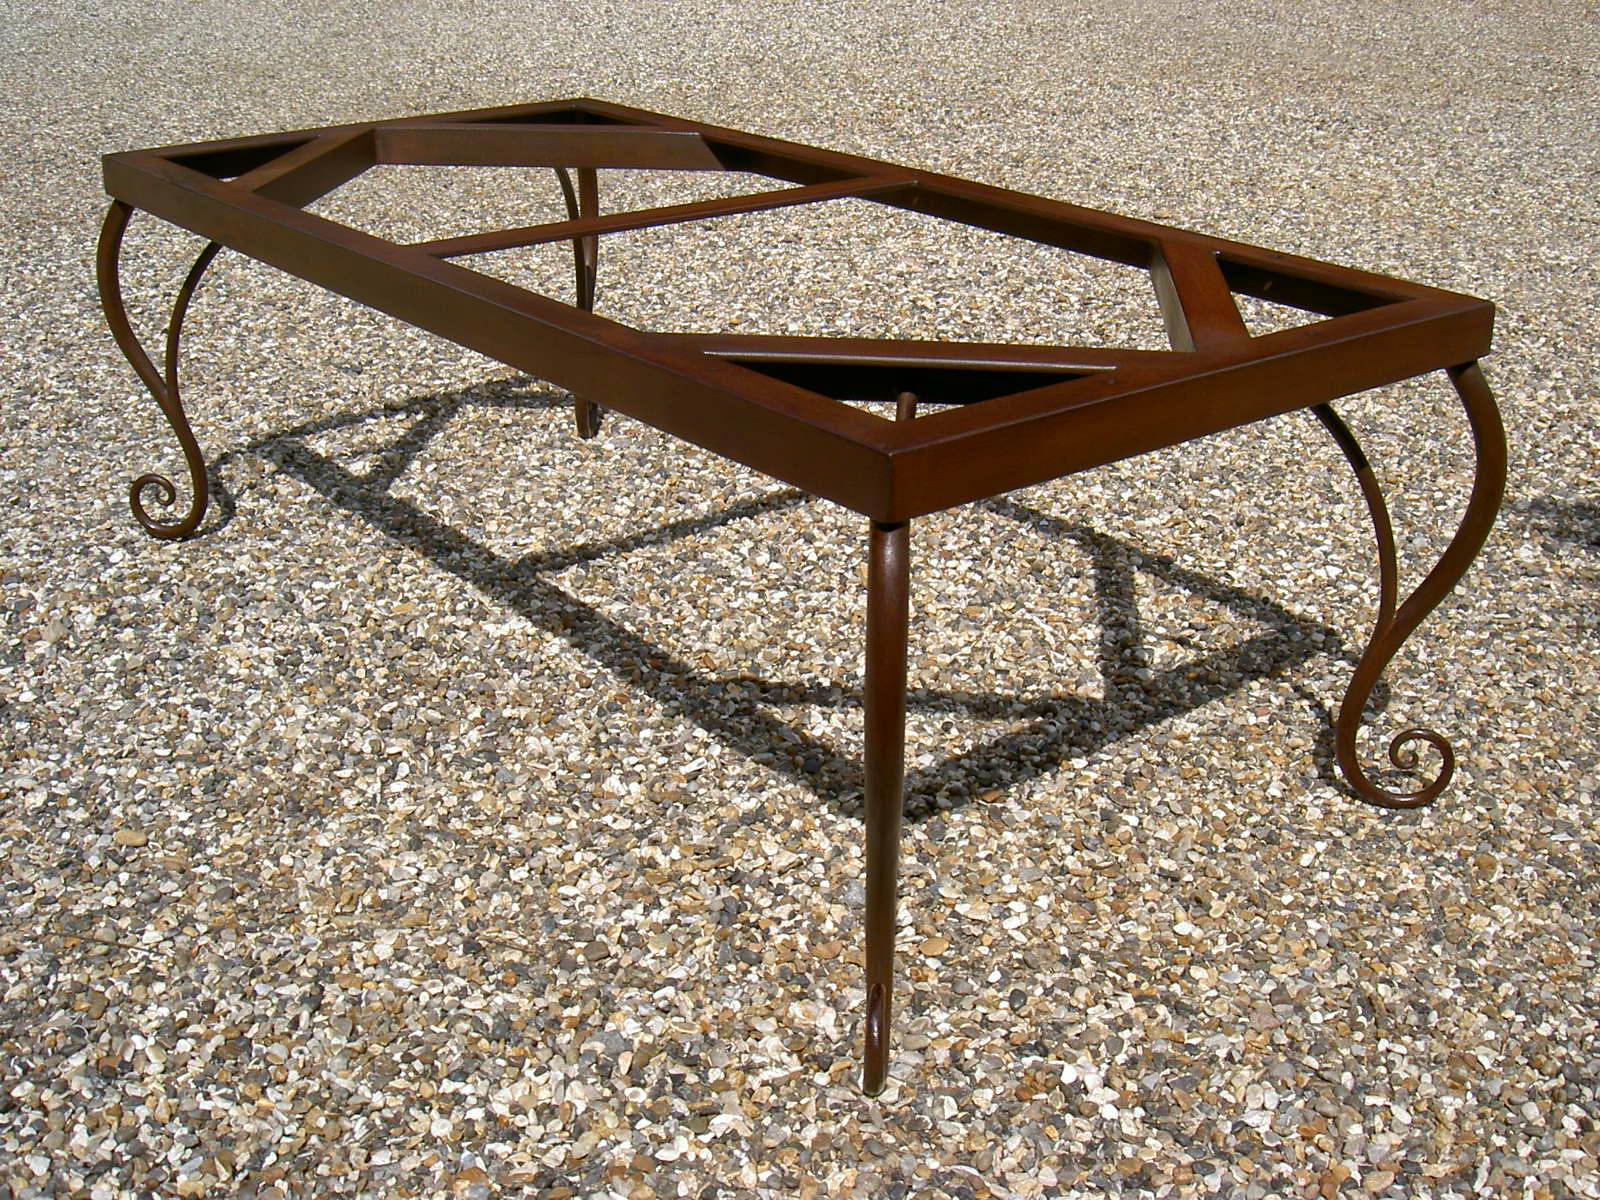 Table base - rusted and waxed mild steel